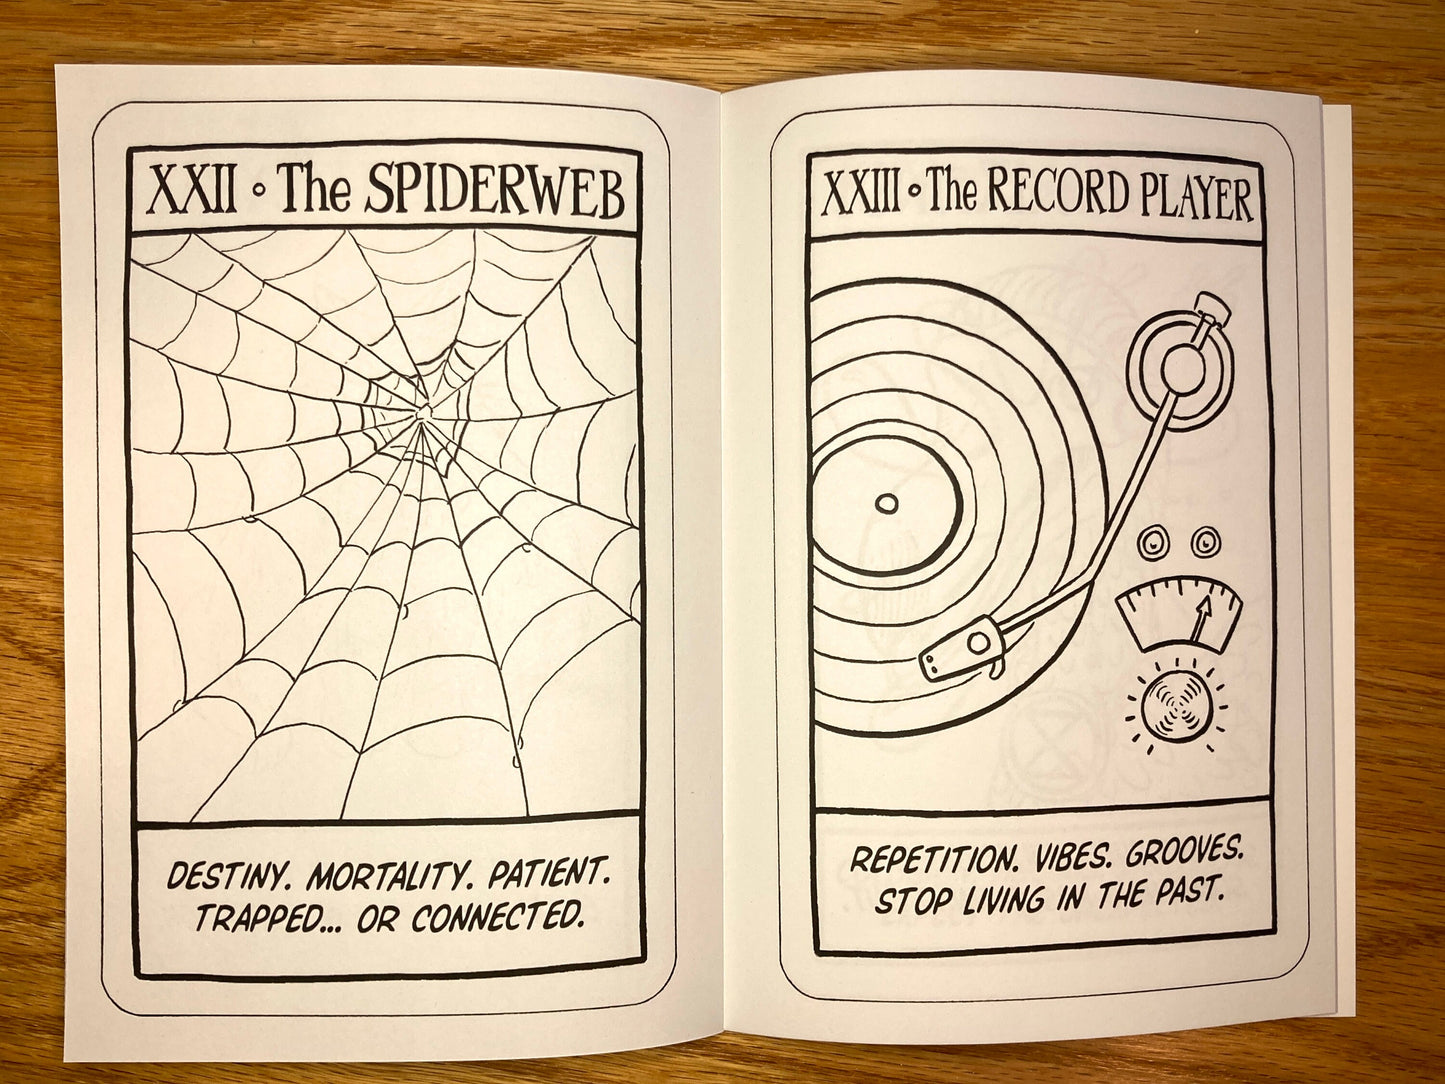 The Faux Tarot - Coloring Book